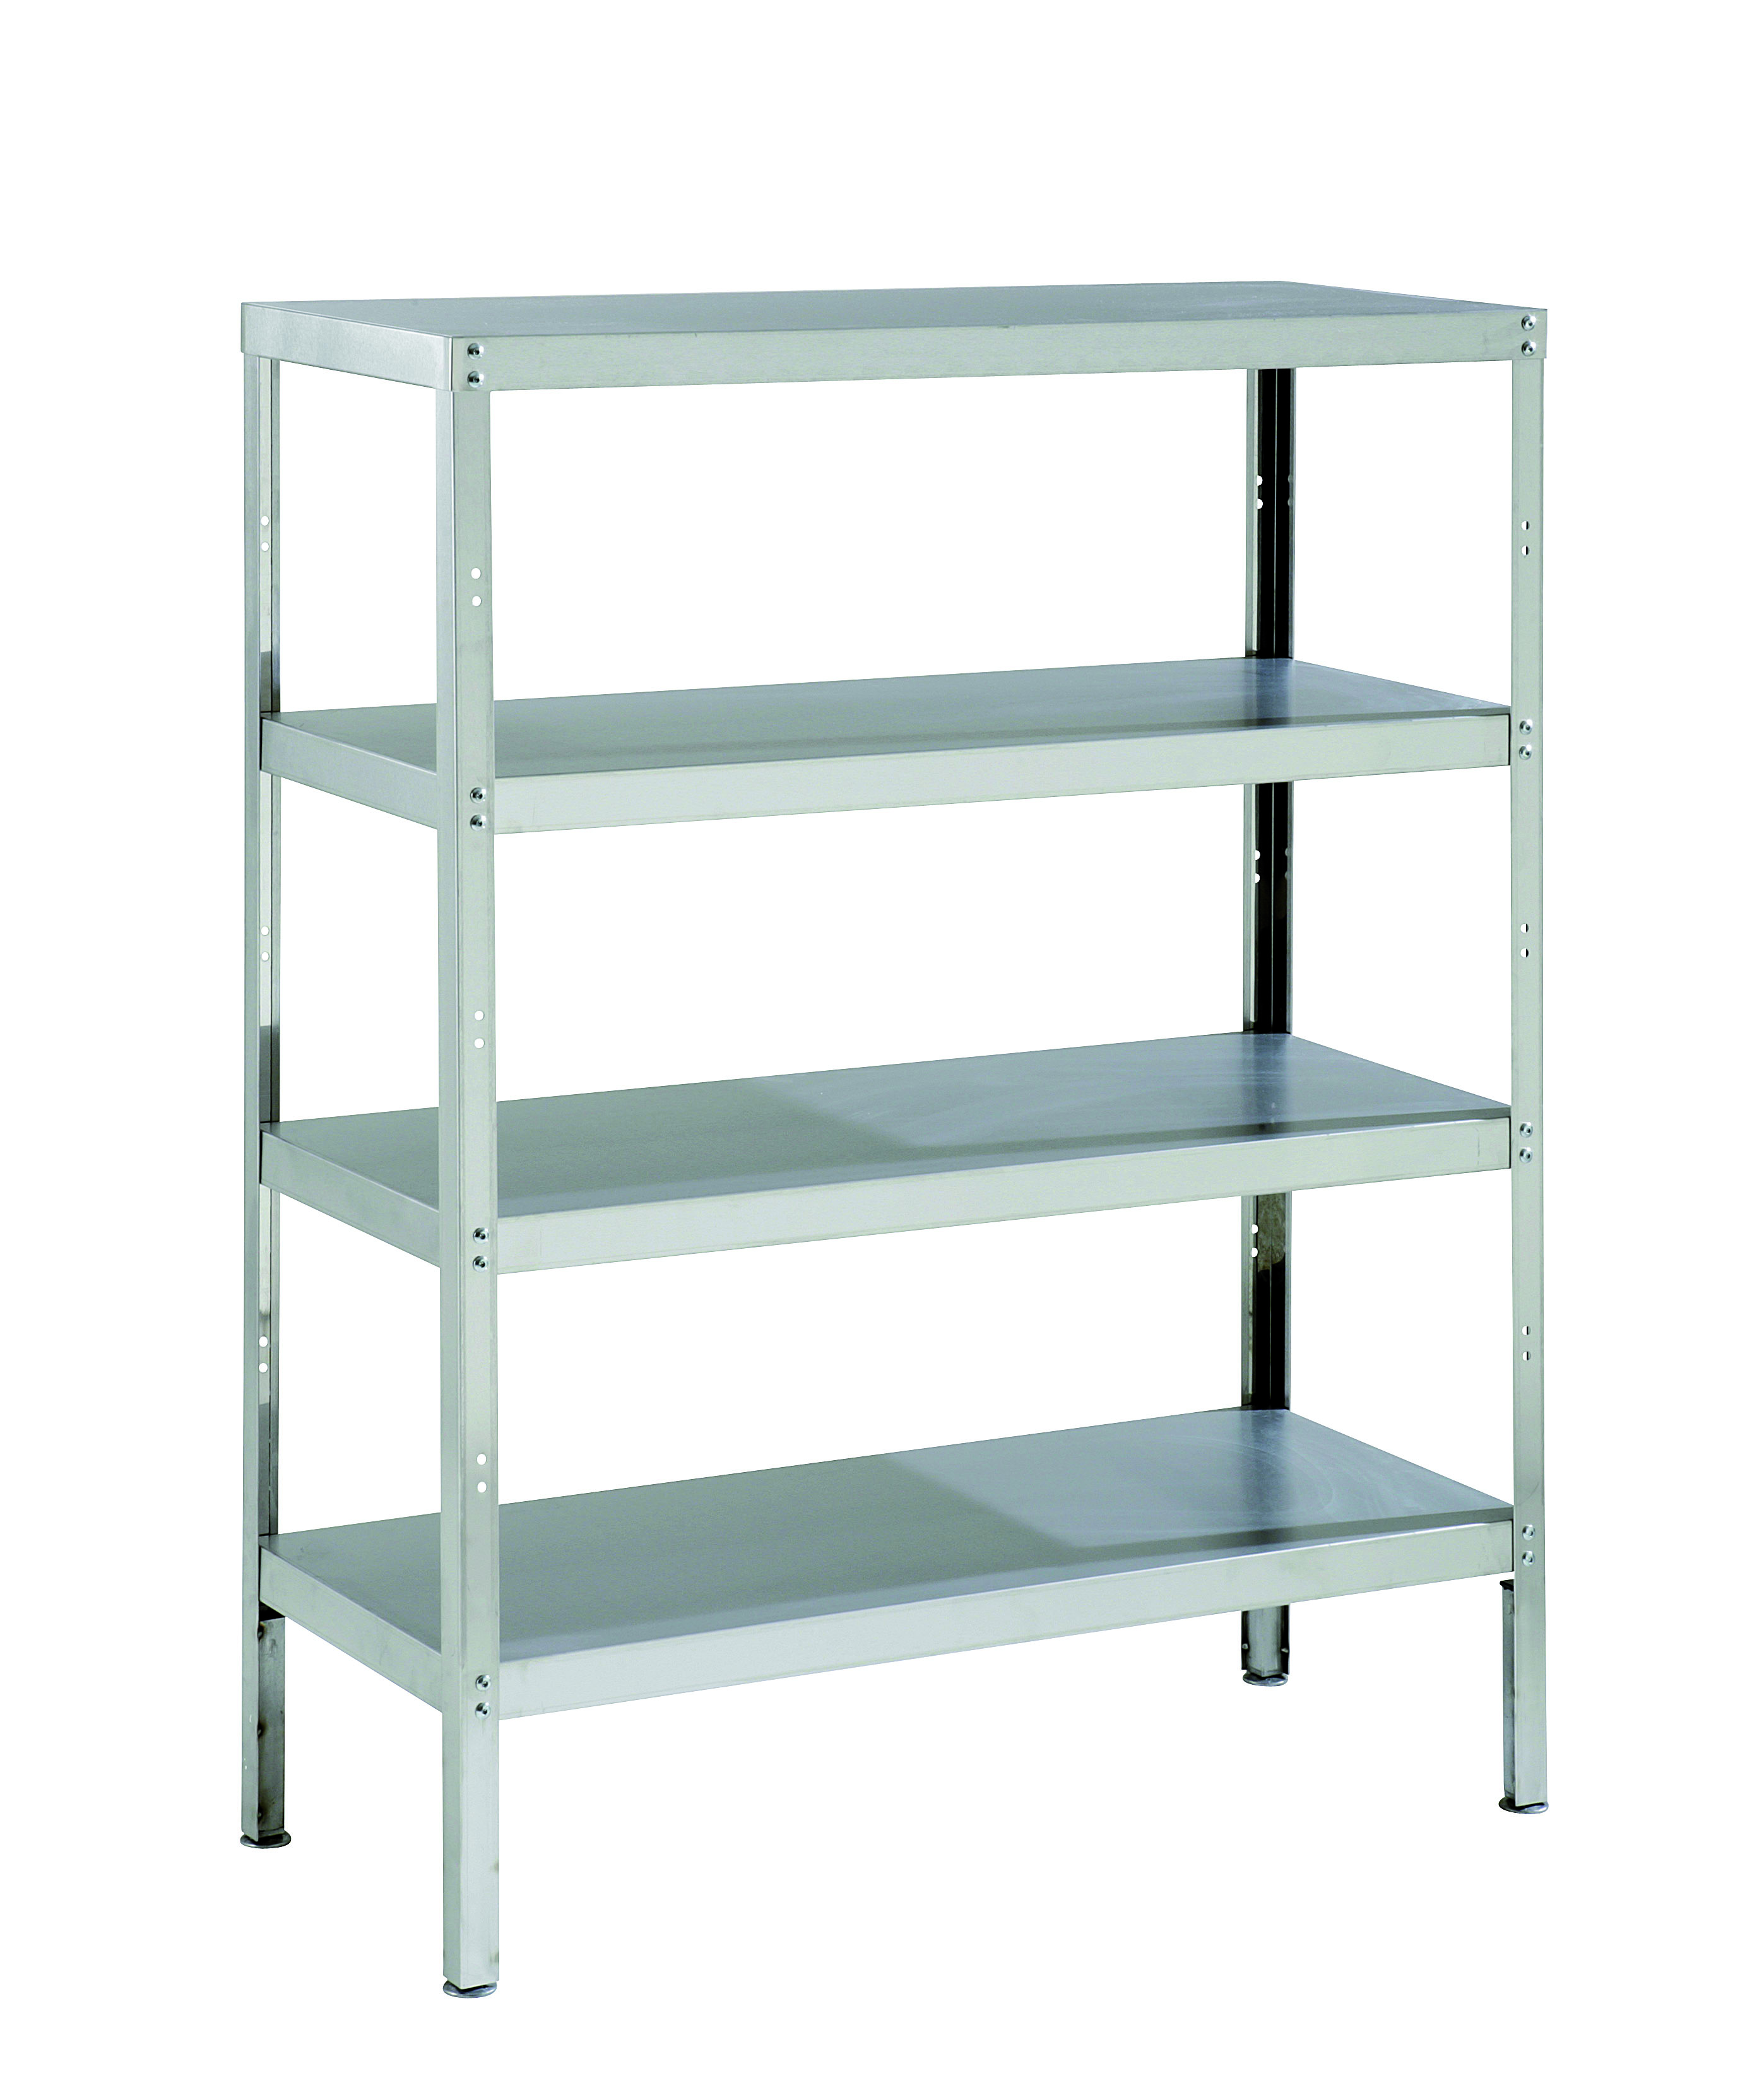 Parry RACK4S - Stainless Steel Storage Rack With 4 Shelves And Adjustable Feet